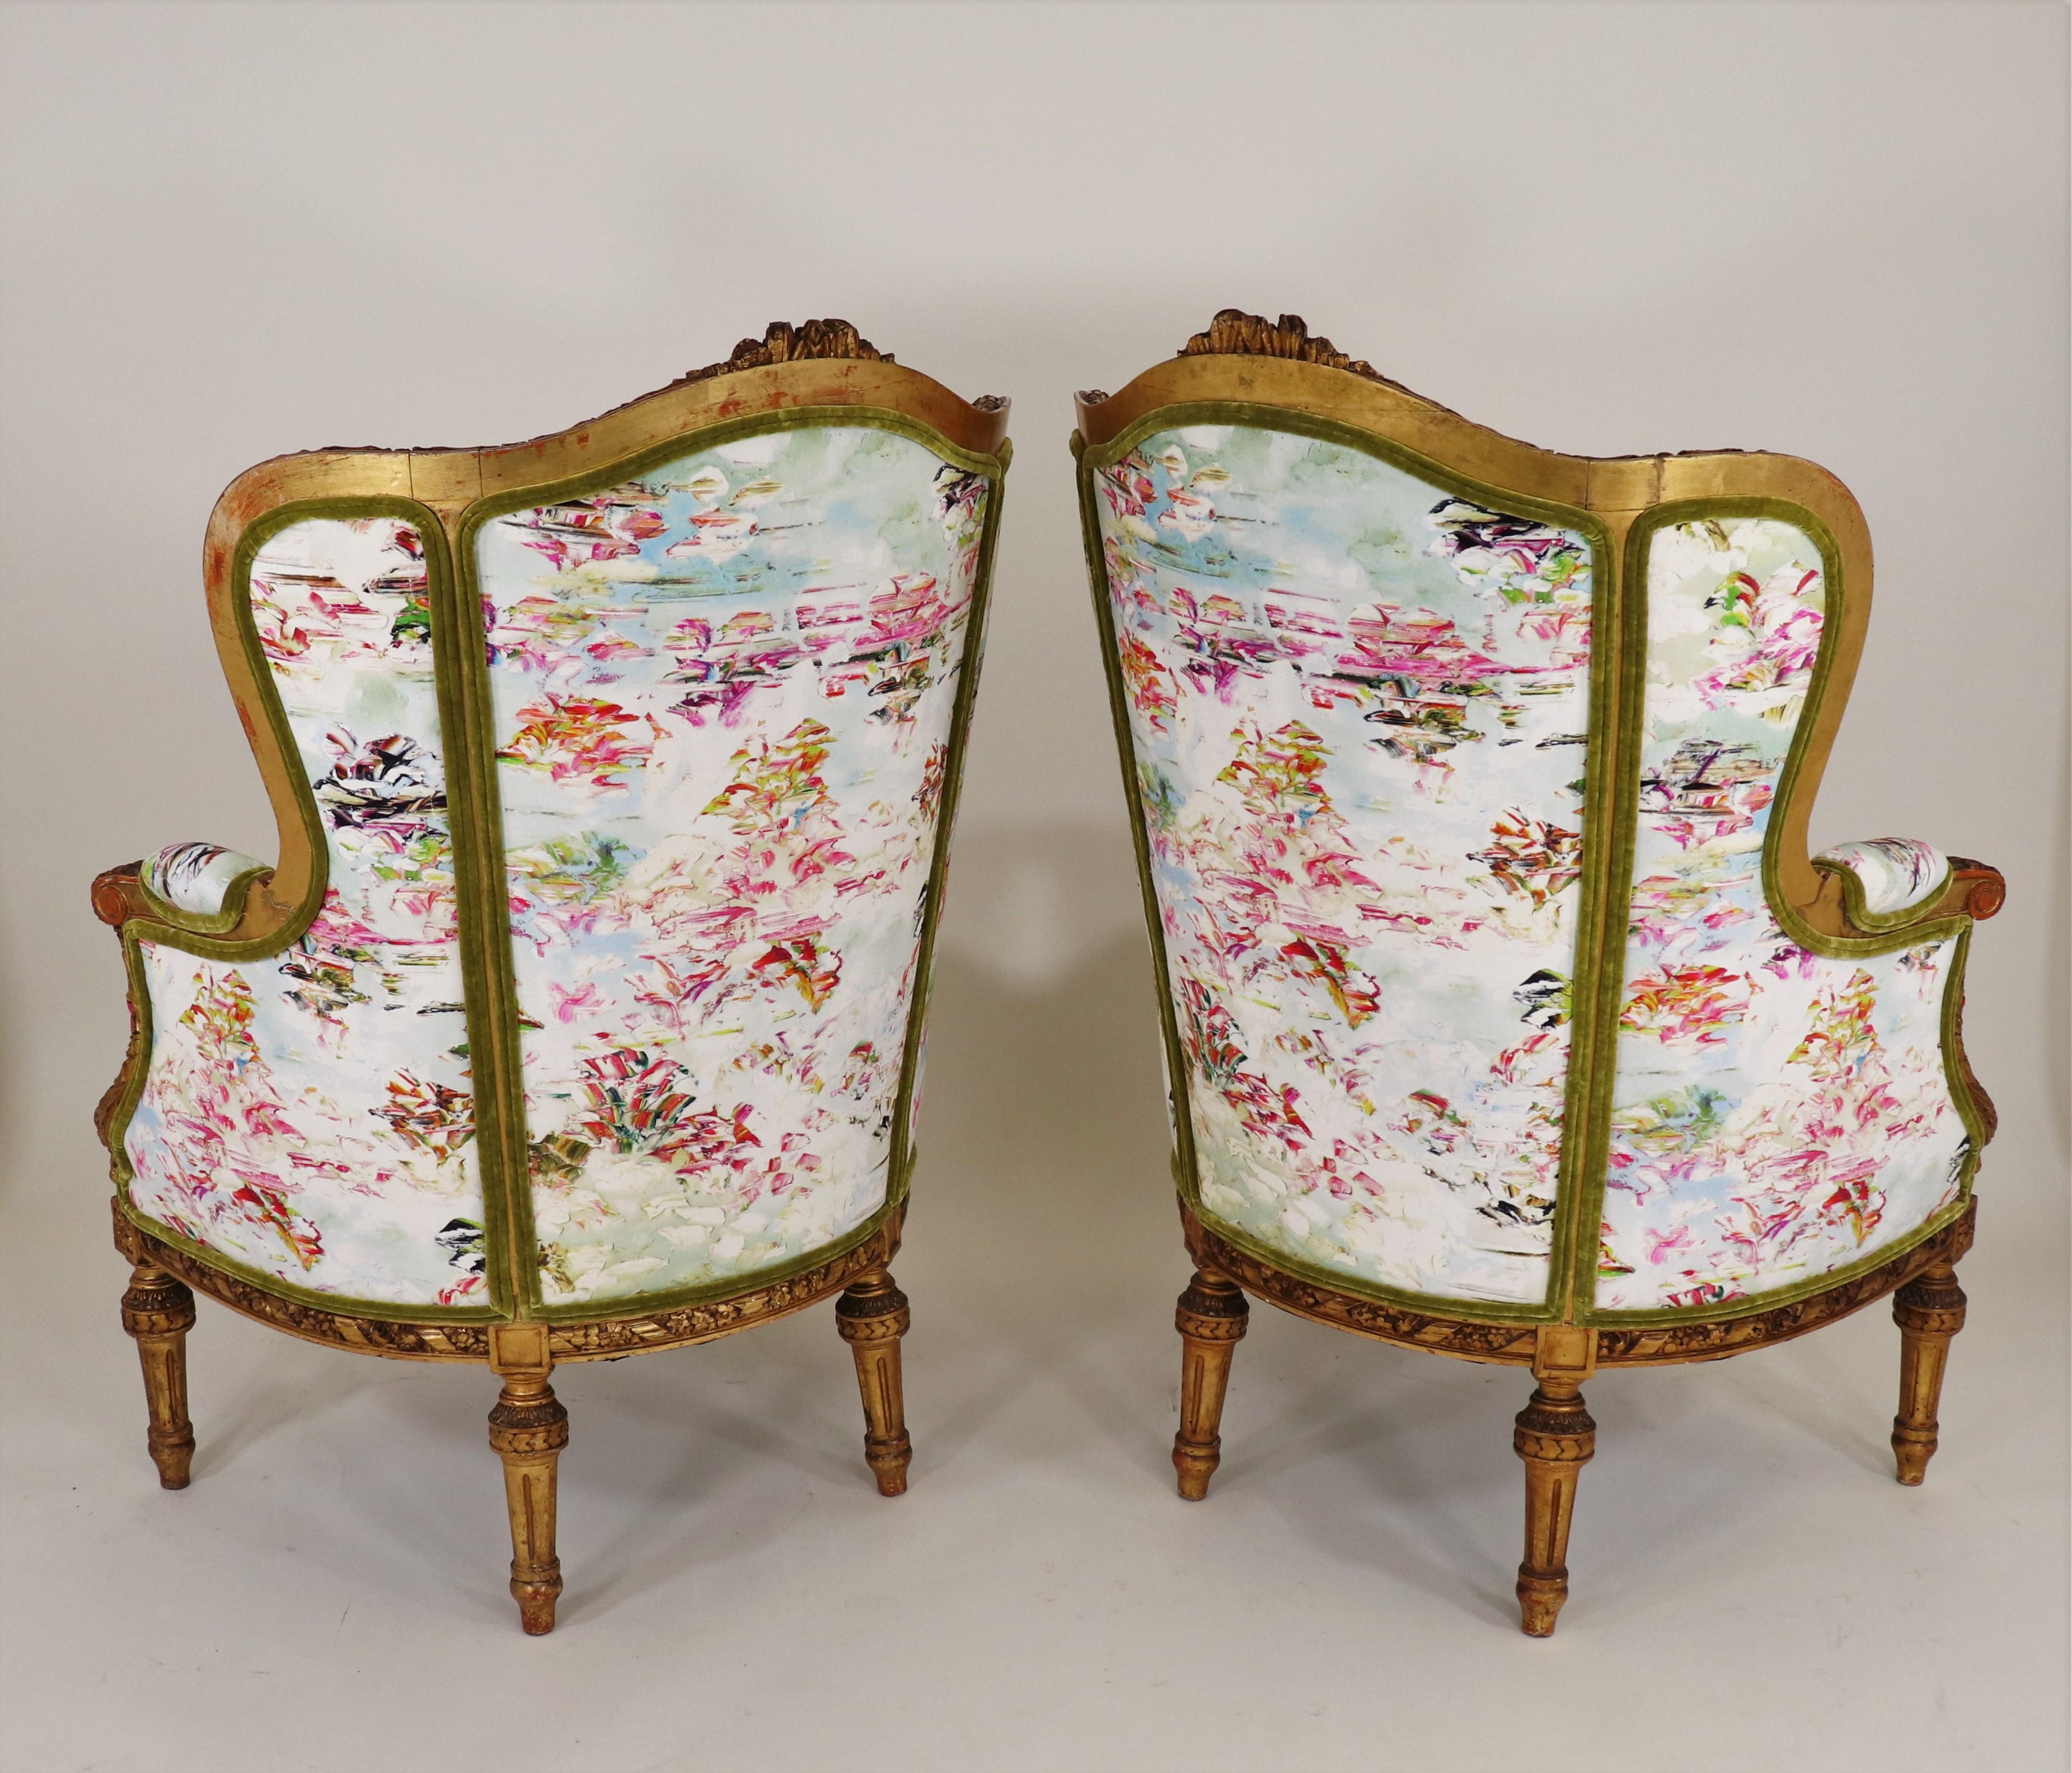 Pair of Mid-19th Century Louis XVI Giltwood Bergère Armchairs with Modern Fabric In Good Condition For Sale In Chicago, IL